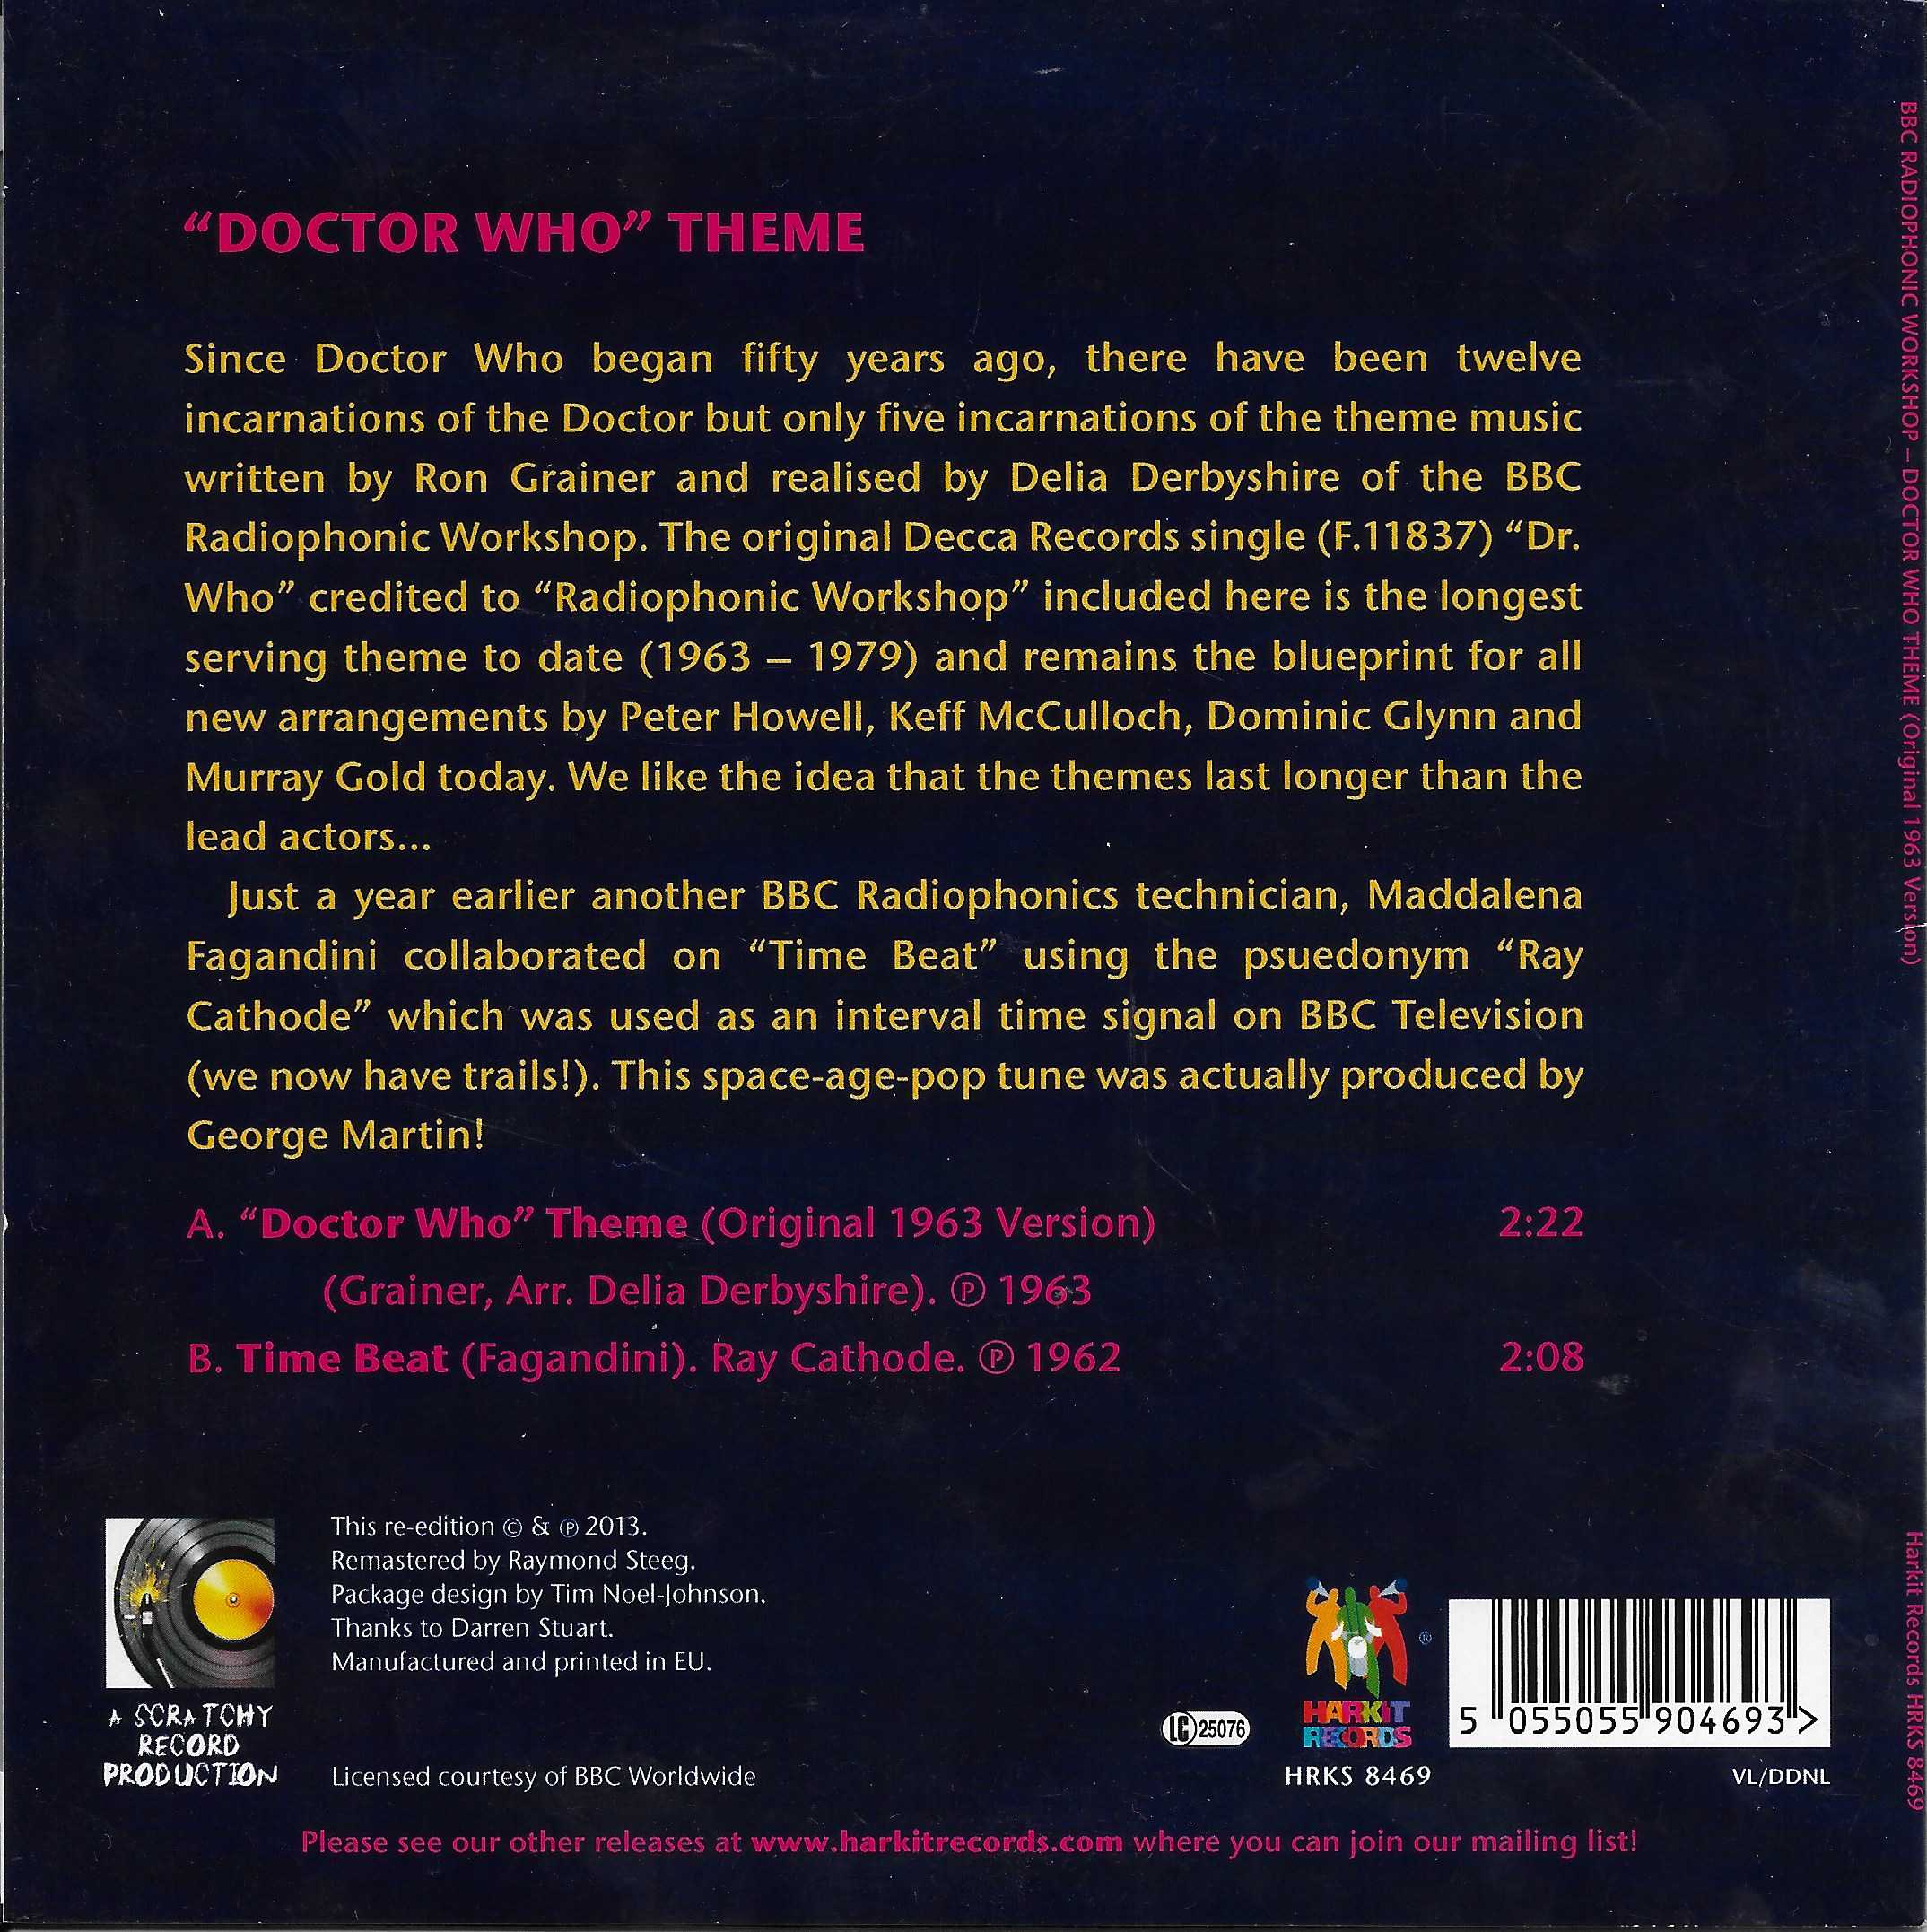 Back cover of HRKS 8469